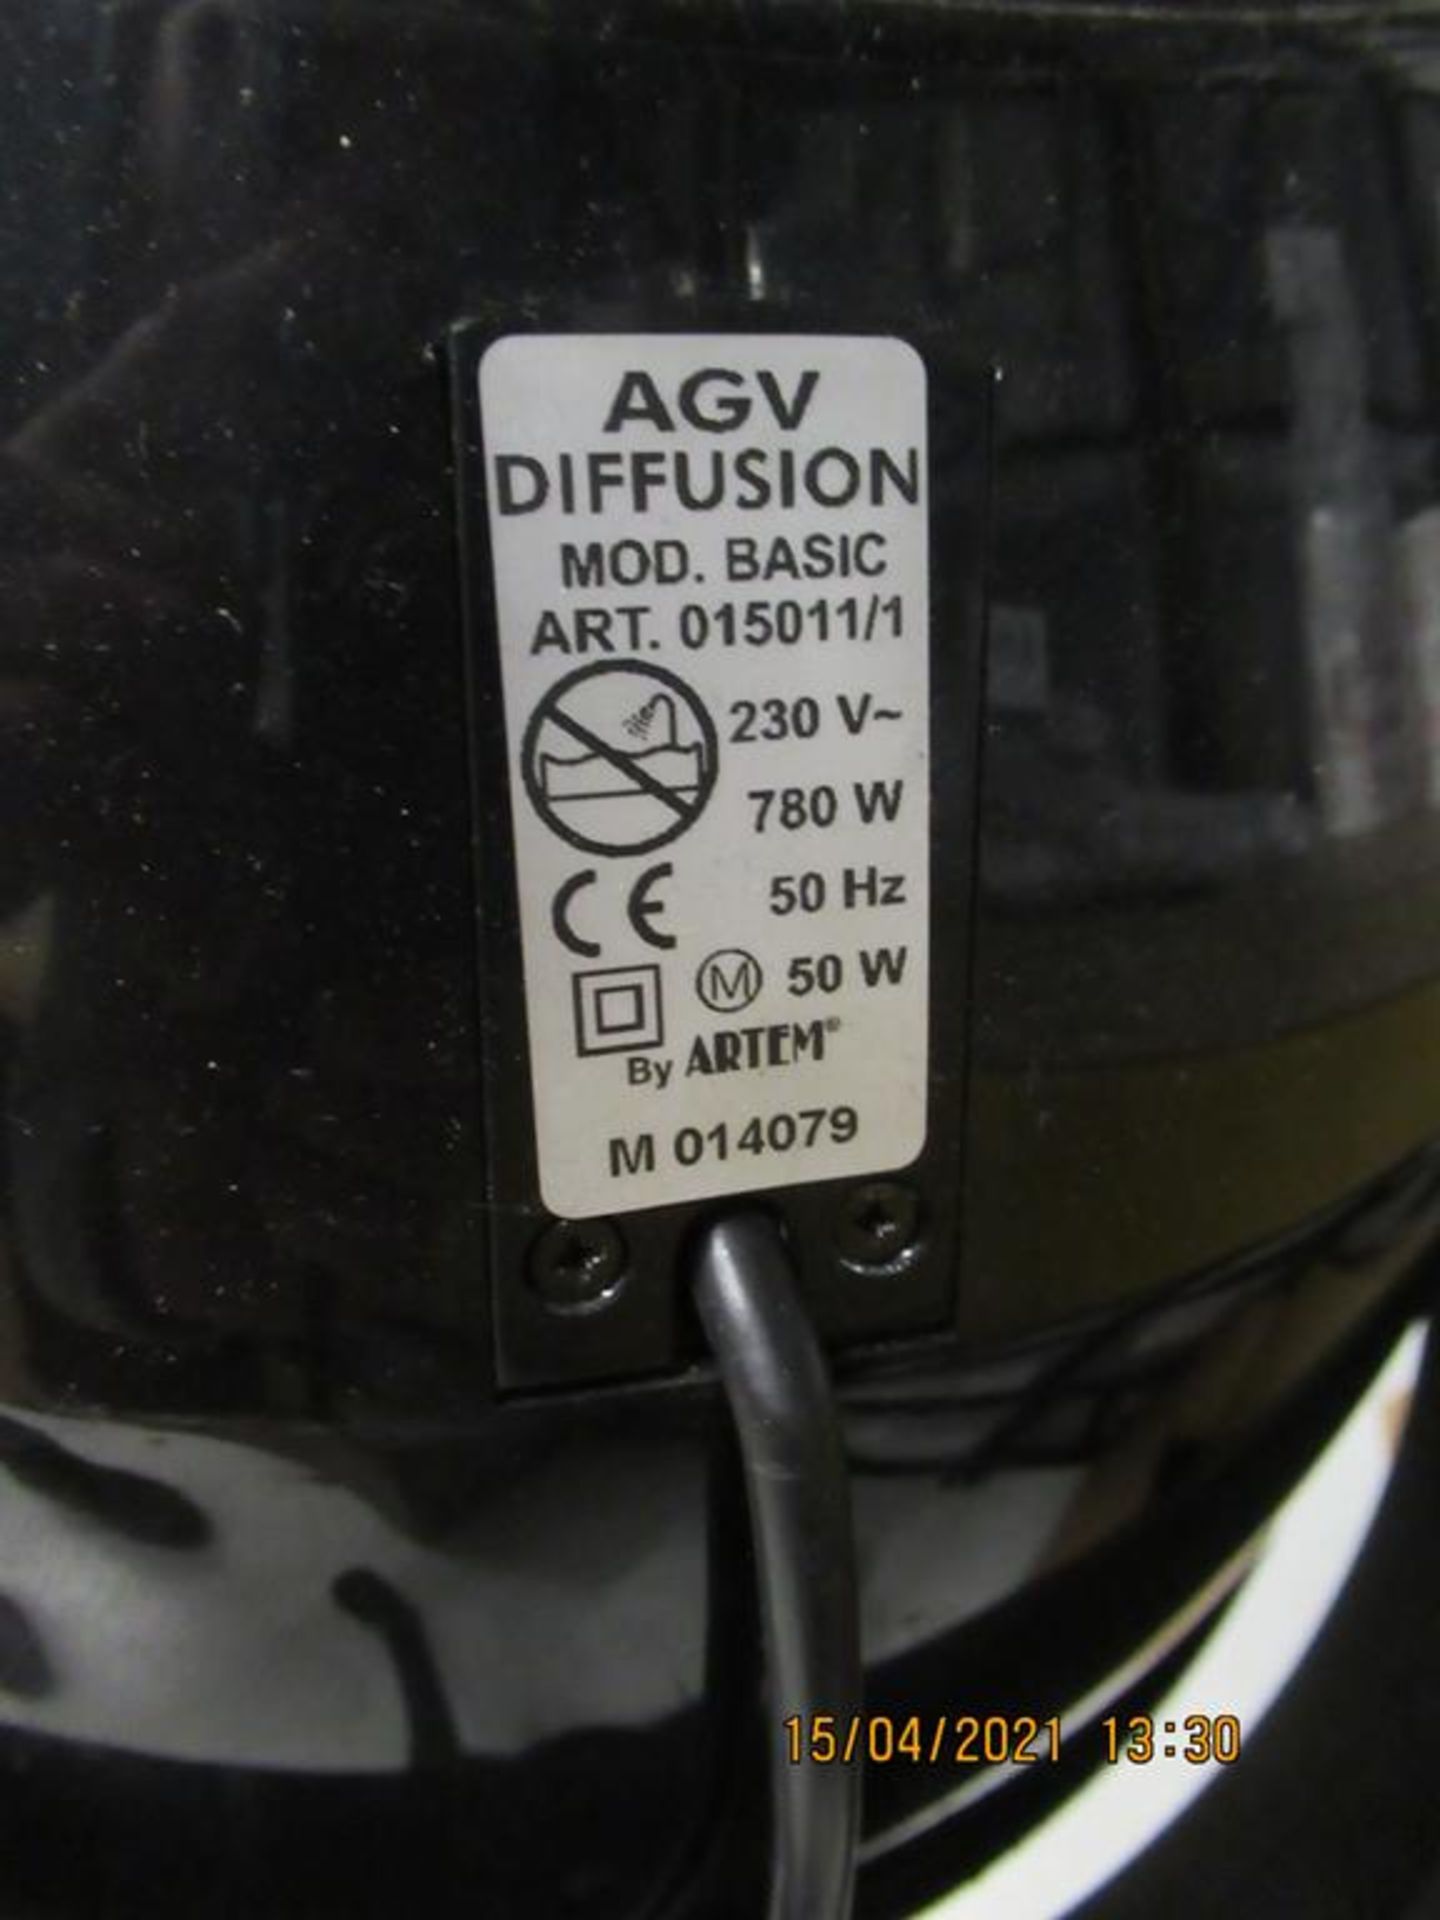 AGV Diffusion Hair Dryer - Image 3 of 3